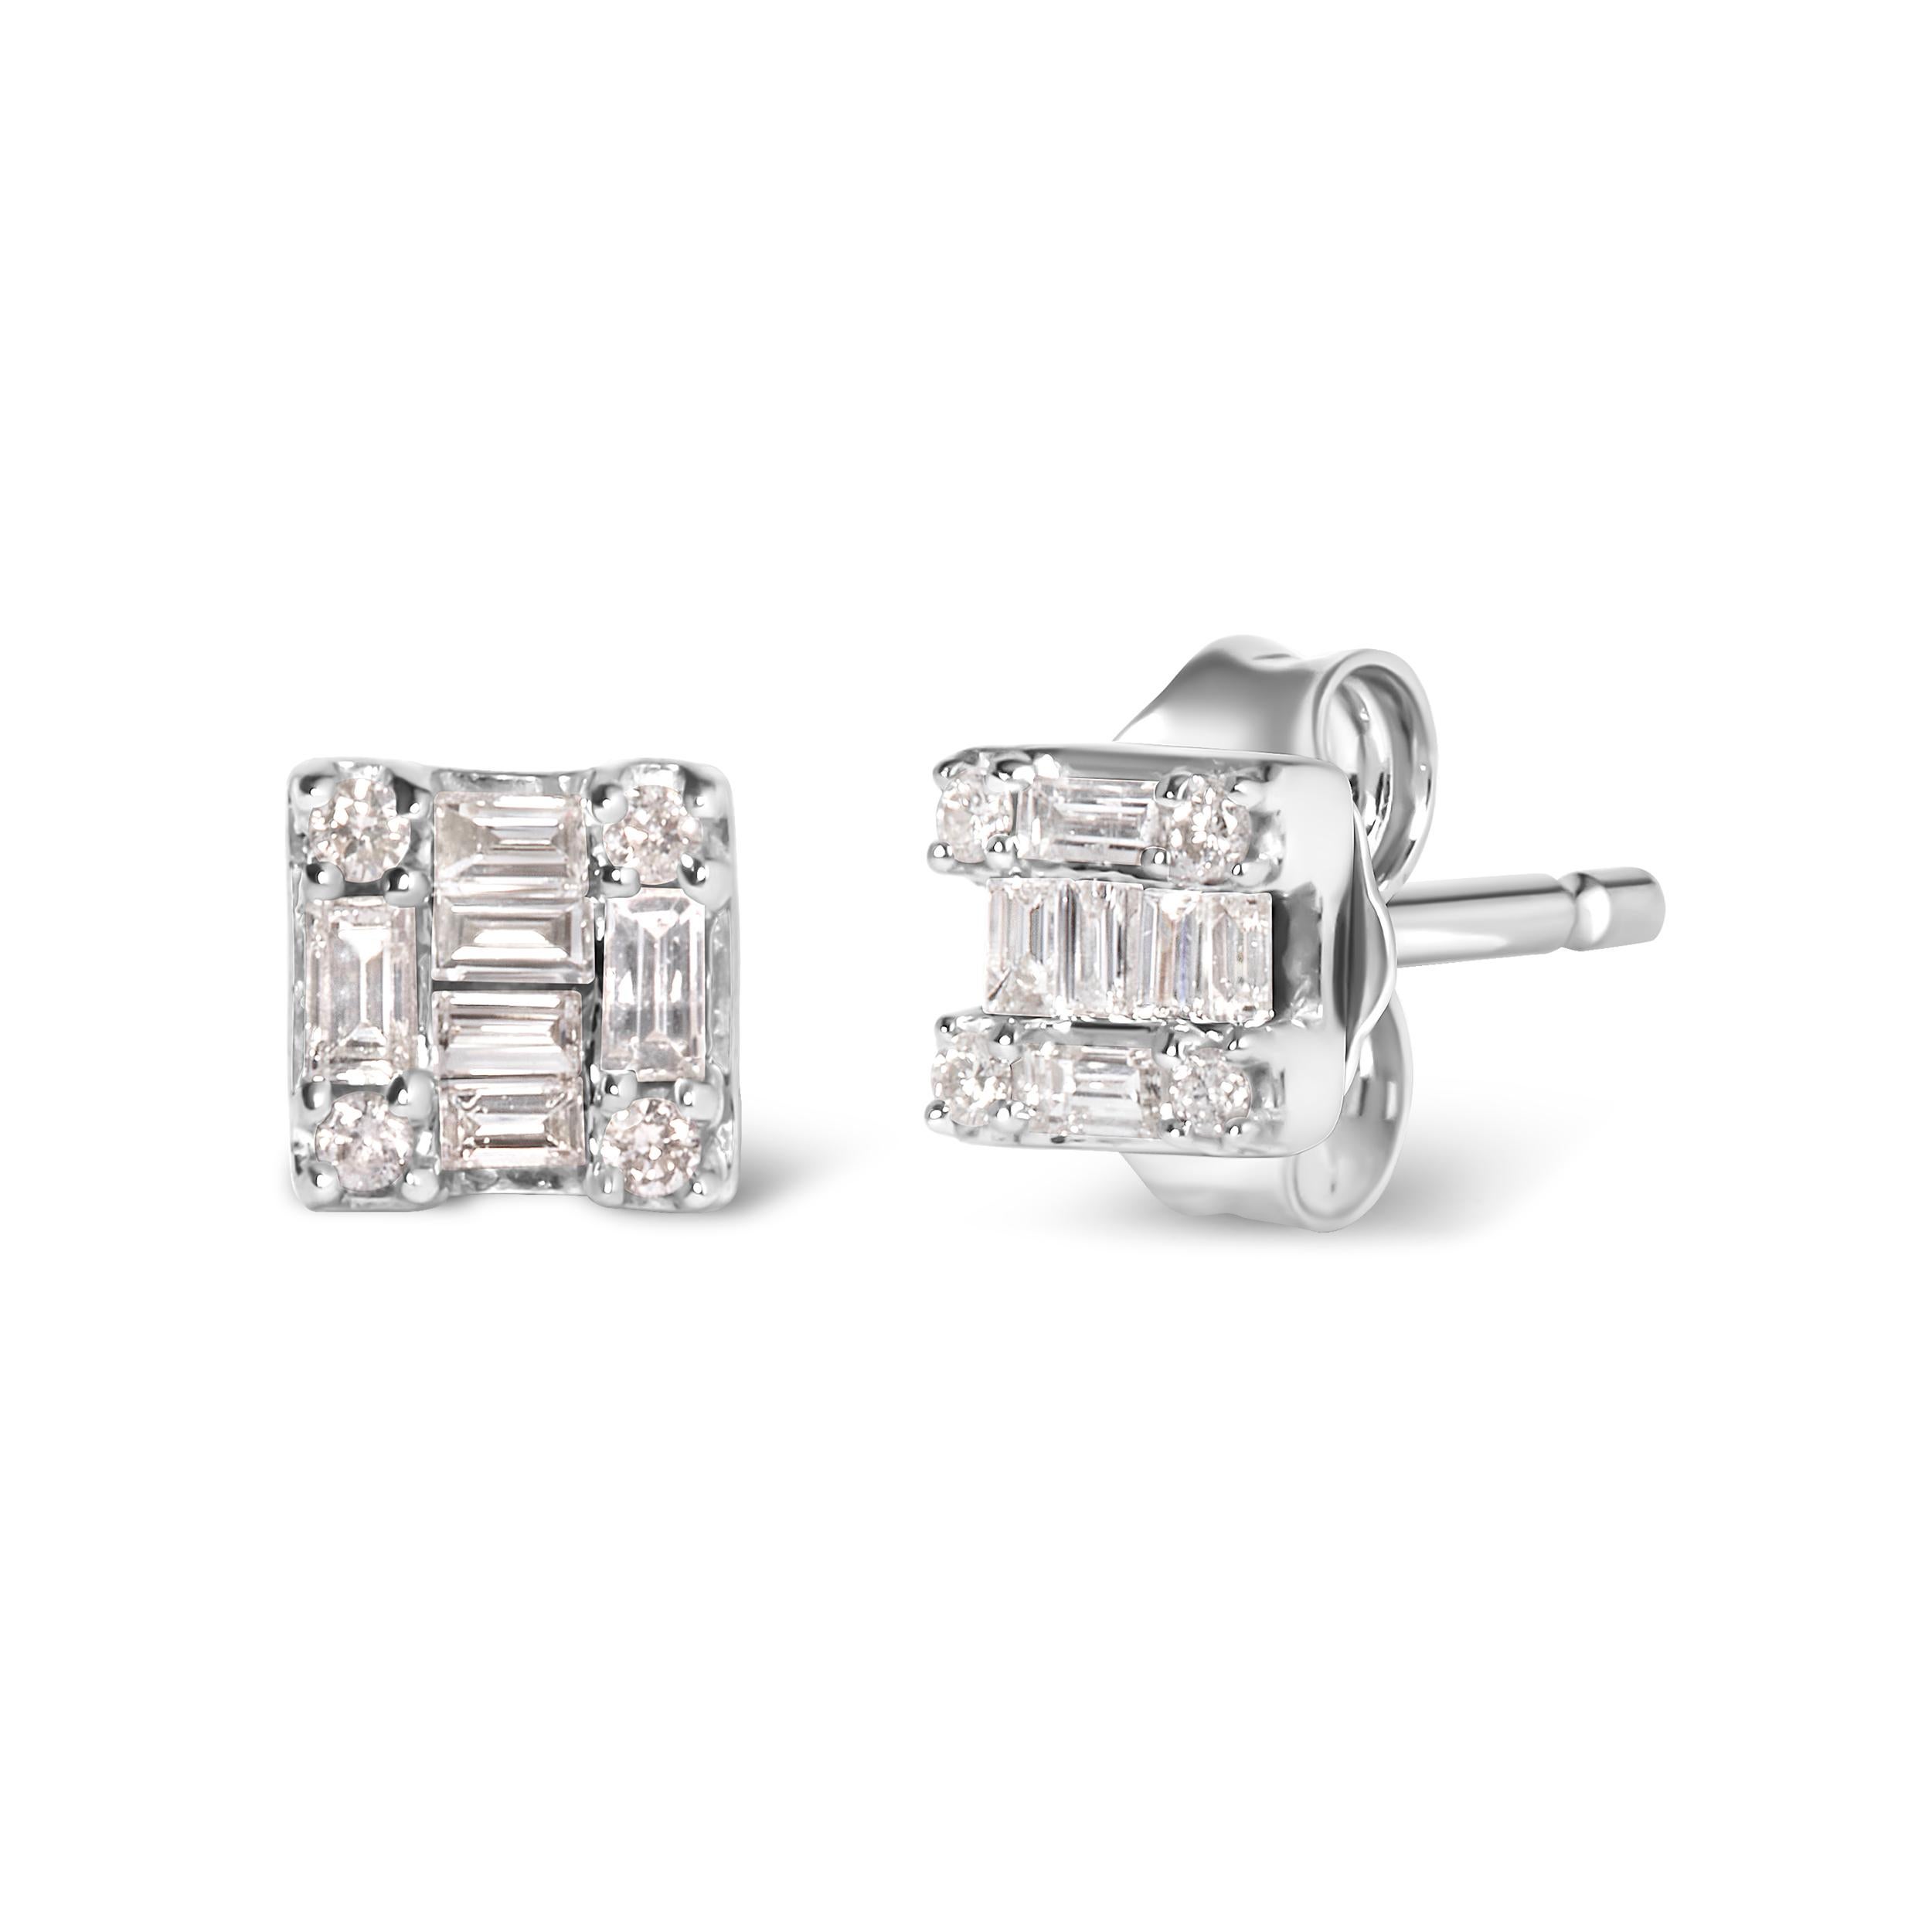 Introducing a mesmerizing masterpiece crafted with exquisite details. Behold these 10K White Gold Stud Earrings, adorned with a dazzling mosaic of round and baguette diamonds. With a total weight of 1/7 cttw and 20 diamonds, these earrings radiate